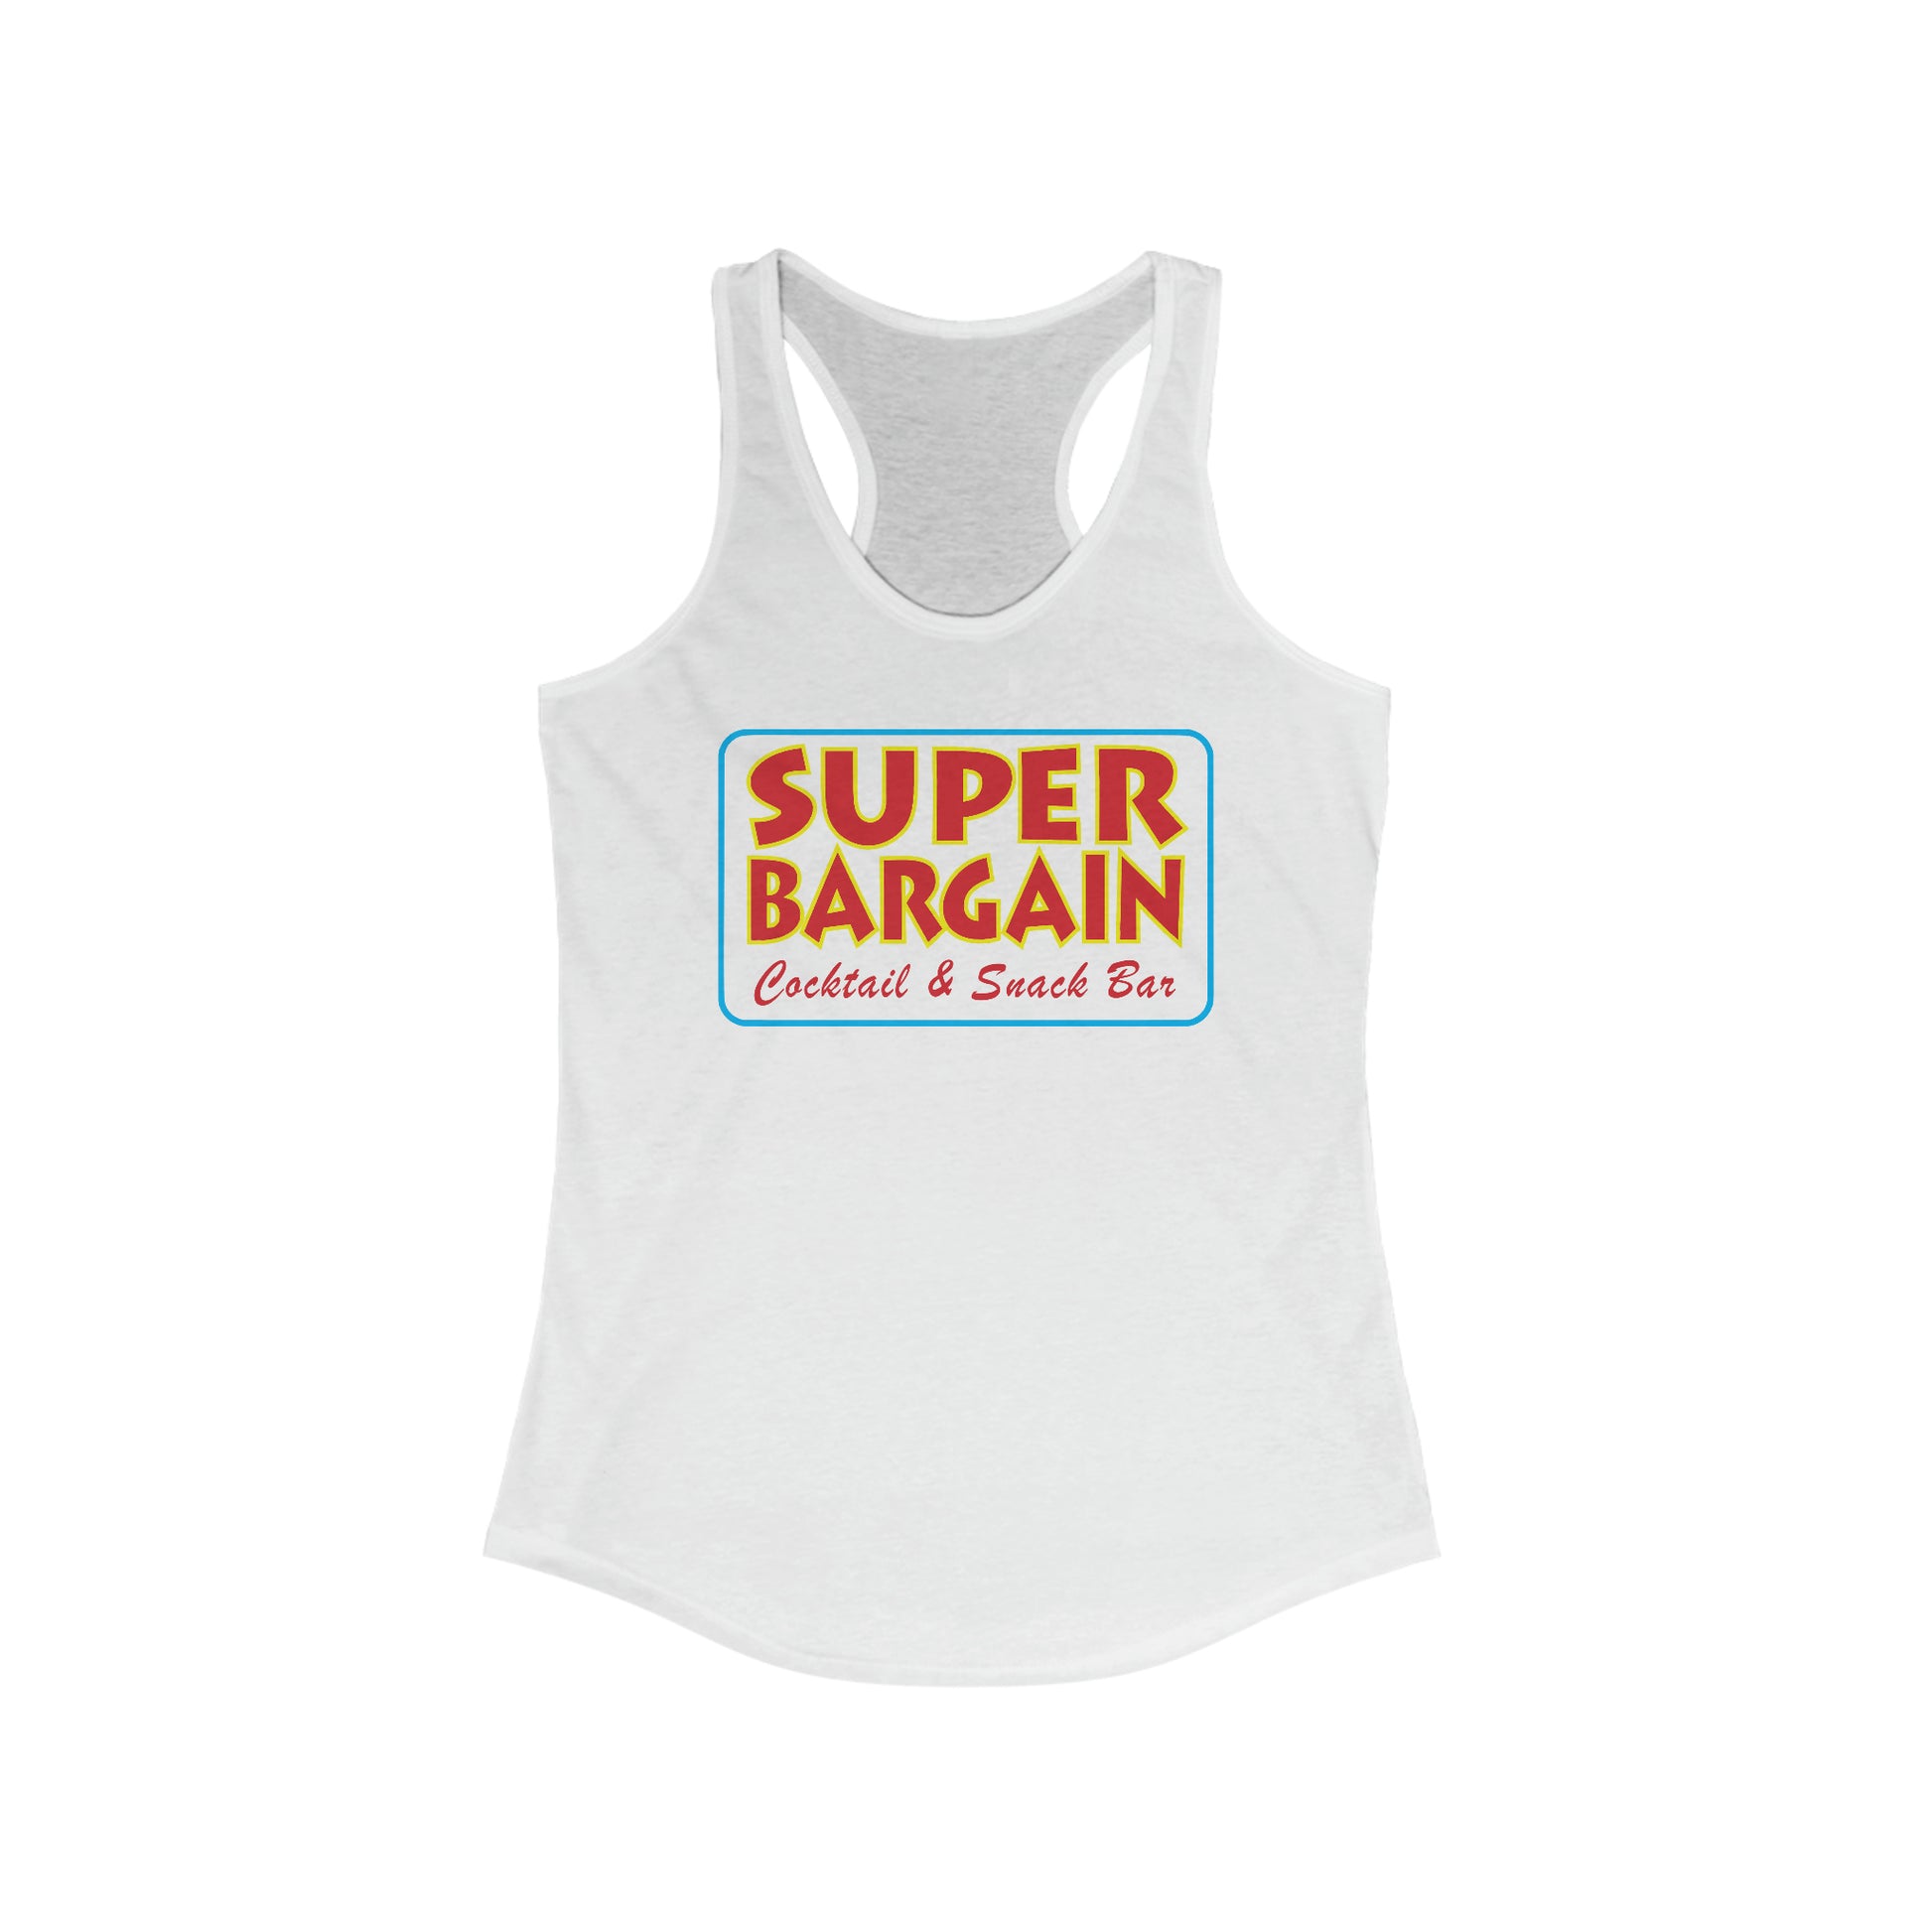 A Printify Women's Logo Racerback Tank with a colorful logo that reads "SUPER BARGAIN, Cocktail & Snack Bar" in red, yellow, and green text on the chest, featuring a subtle nod to Toronto's Cabbagetown.